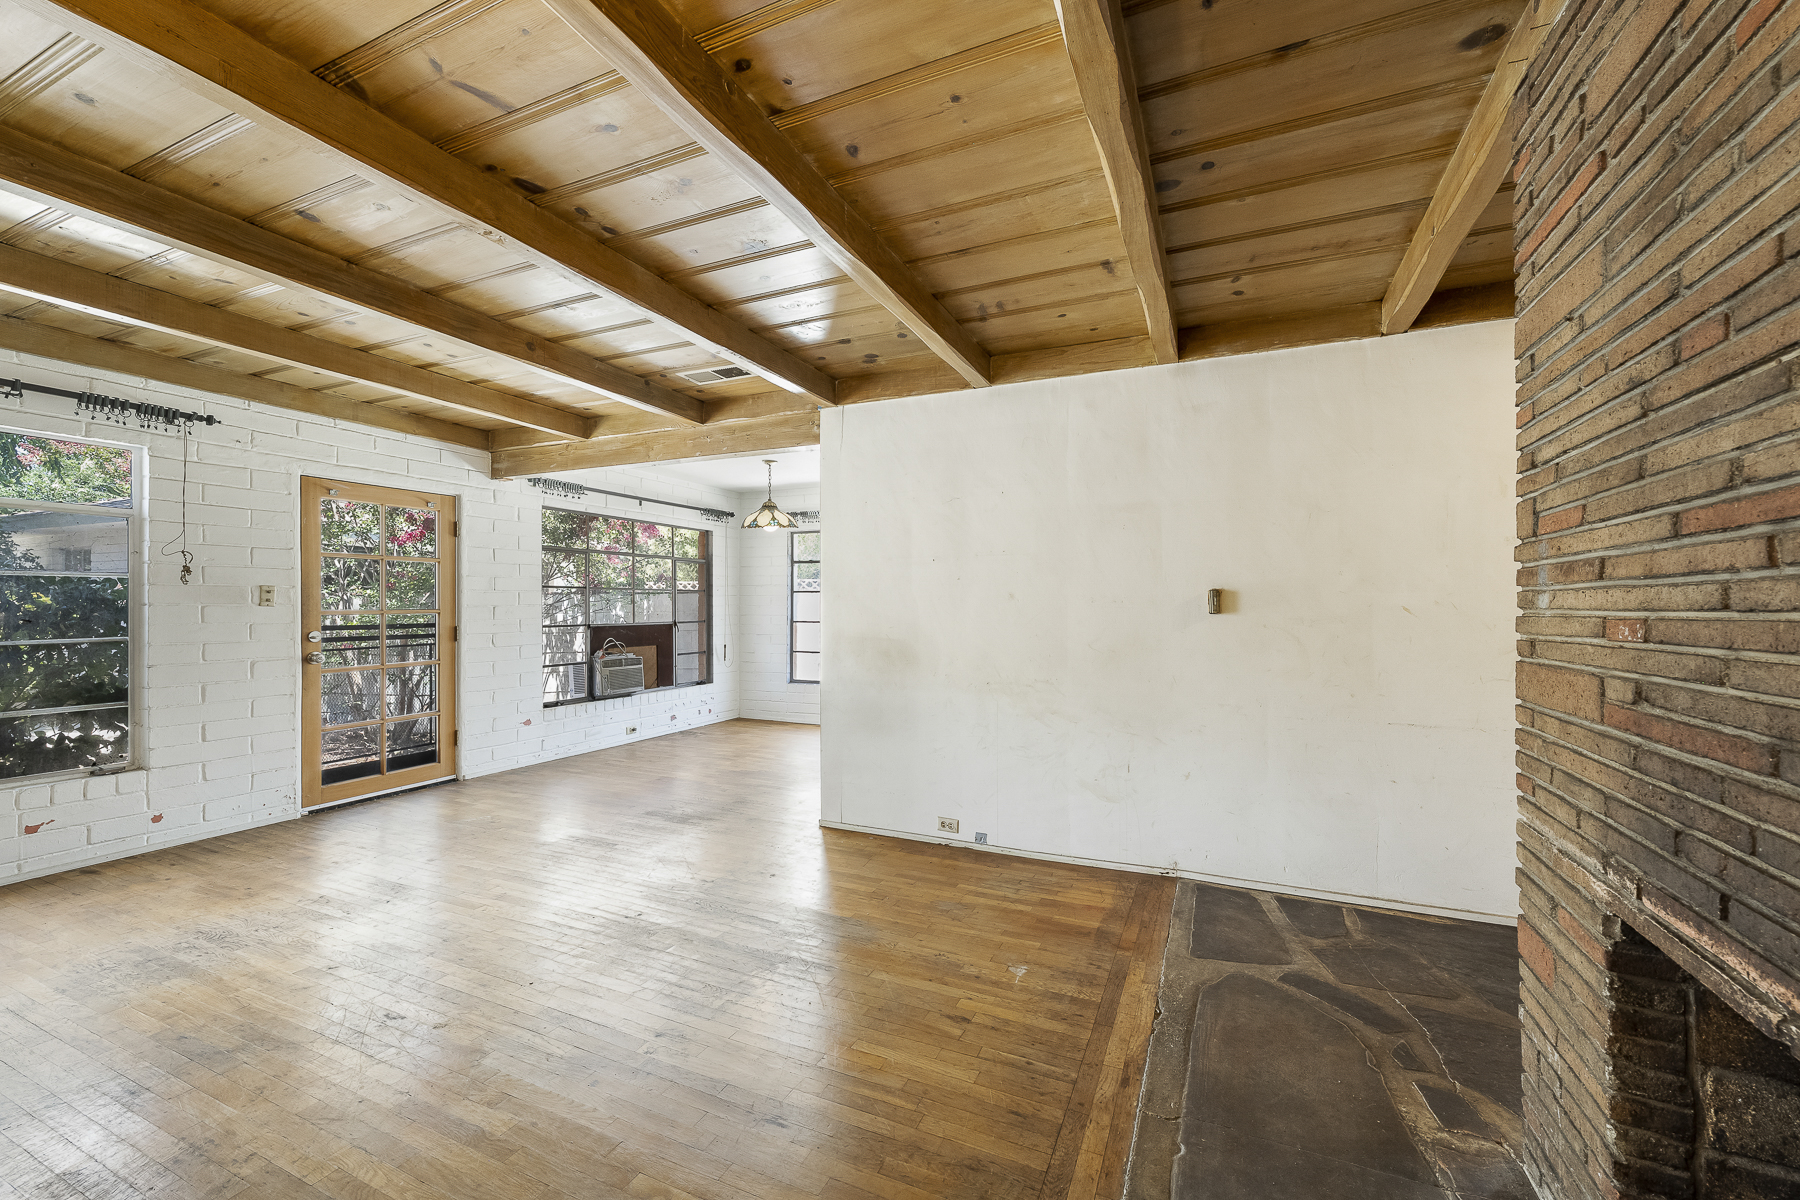 319 E. Francis Ave, La Habra, CA 90631: Interior shot of living room, fireplace, back door and wood panel ceiling.